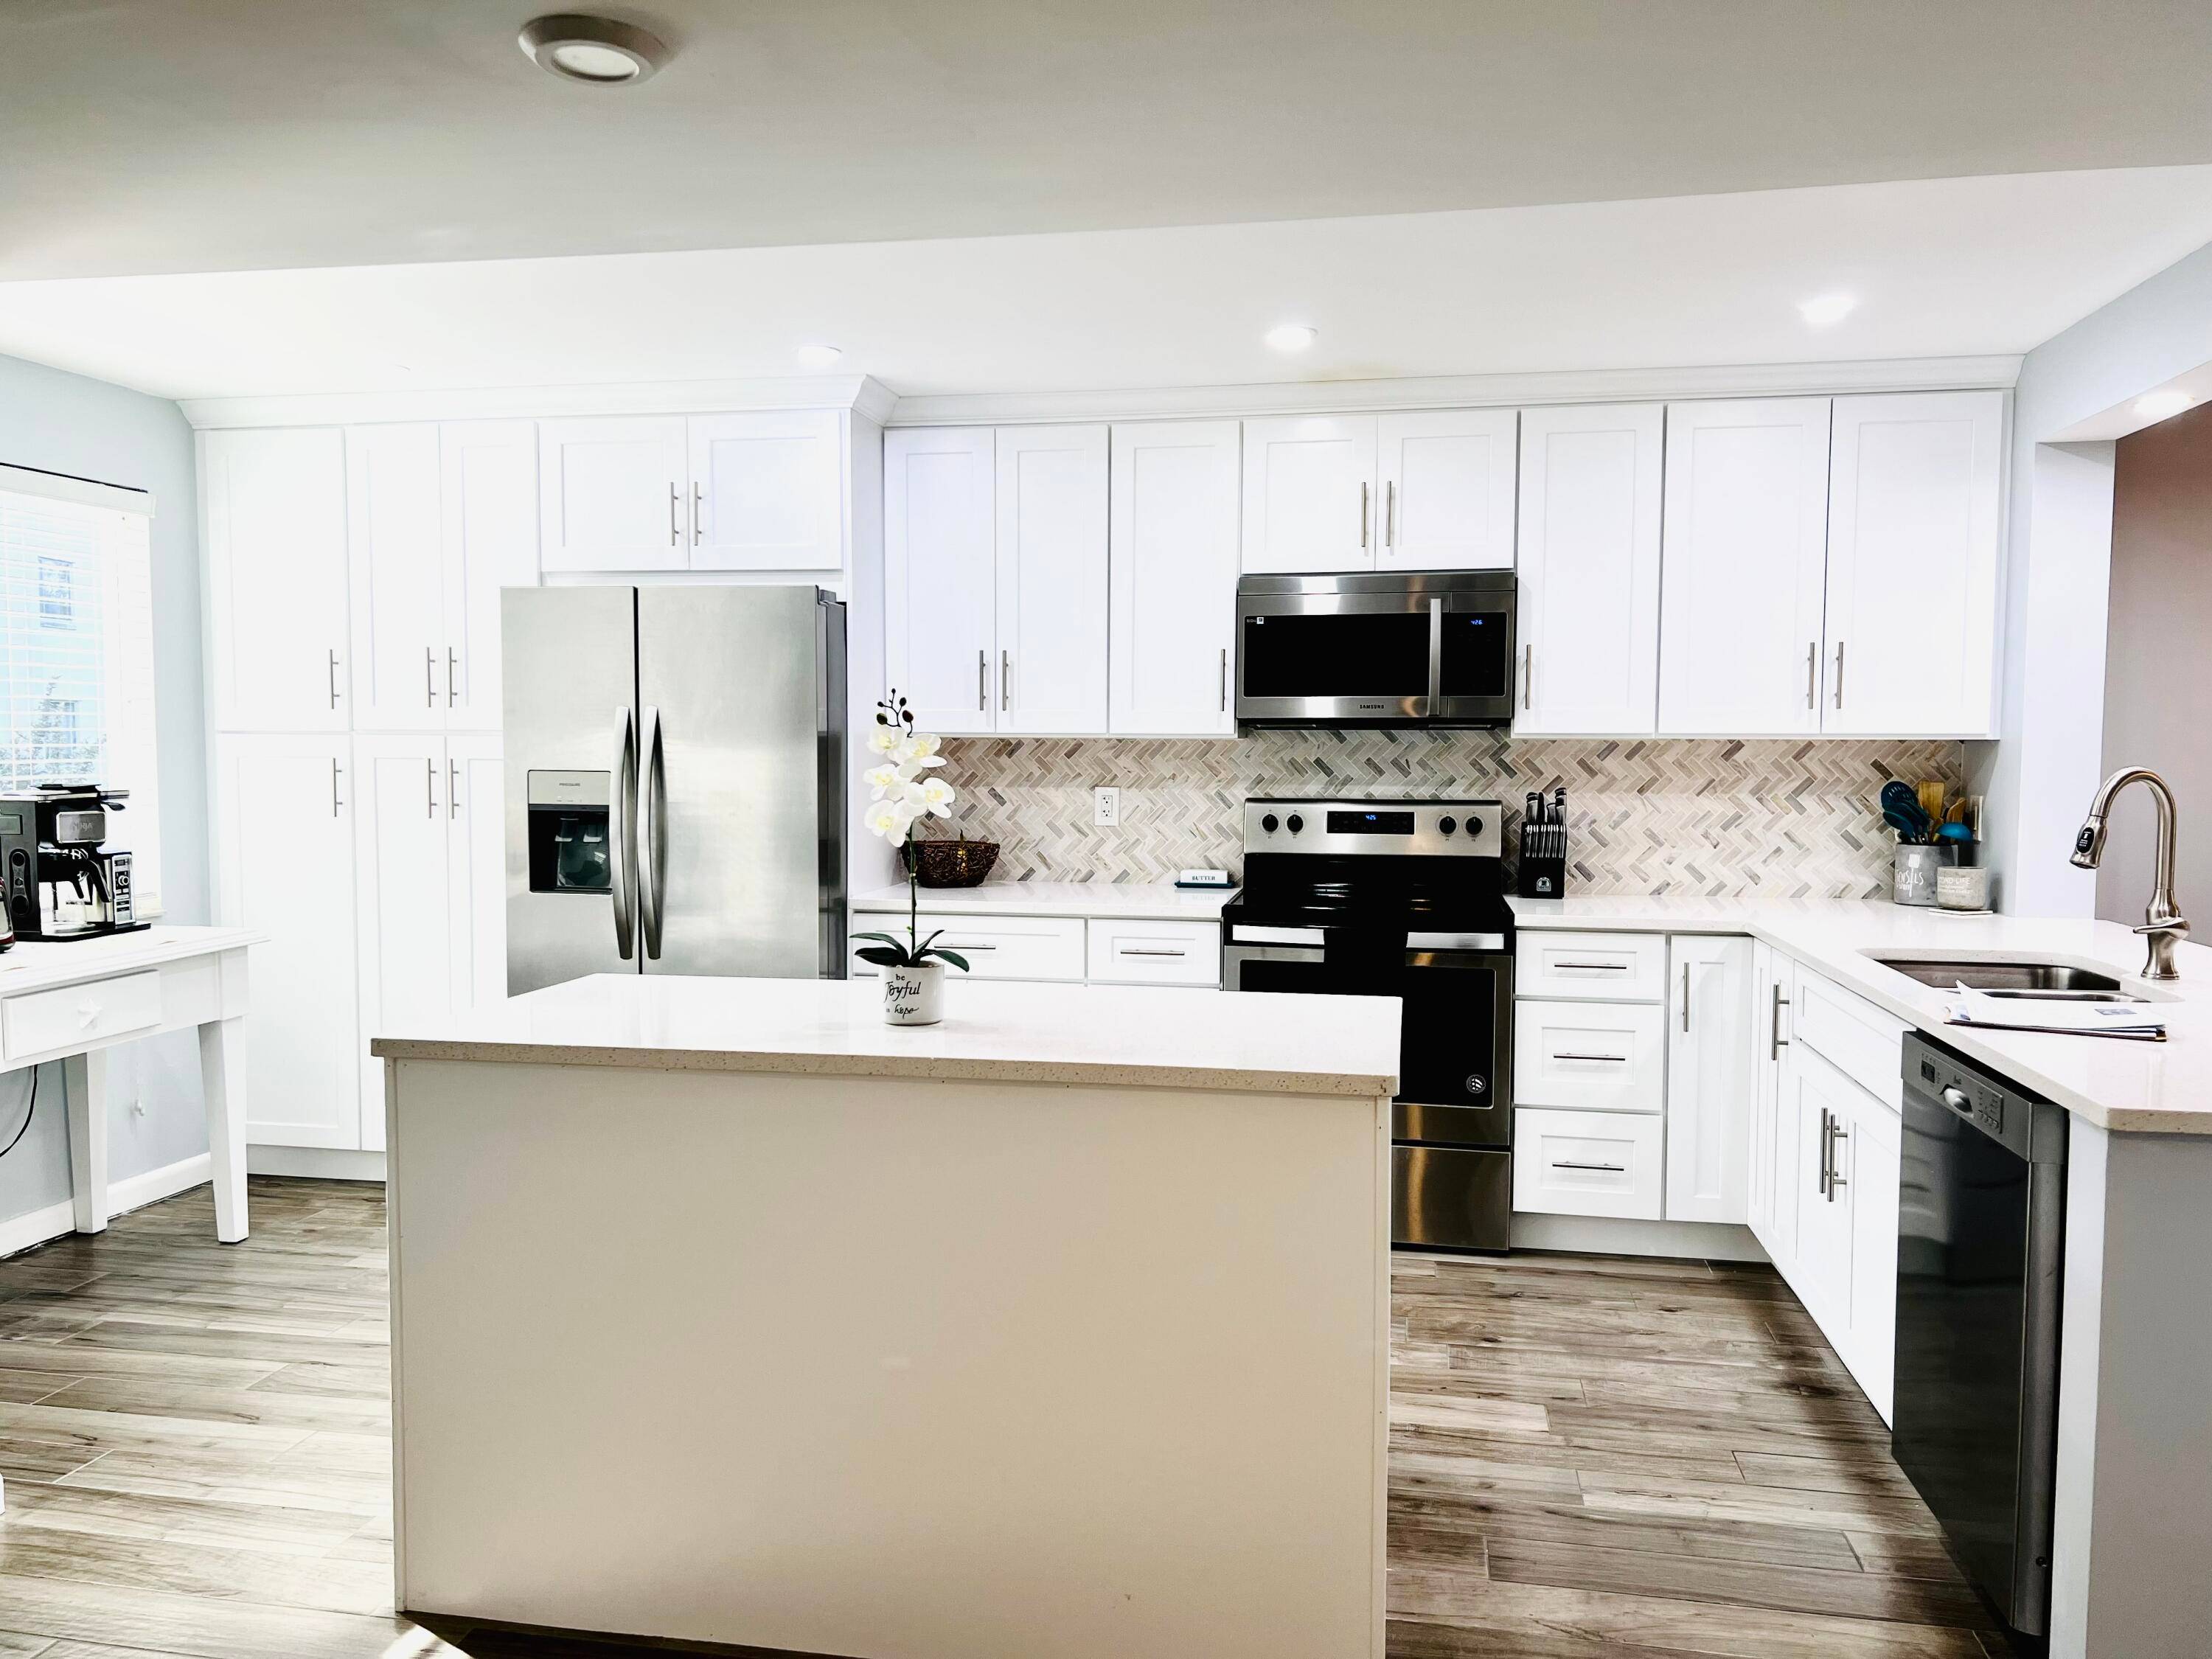 Renovated Condo with open kitchen, stainless steel appliances, white shaker style wood cabinets, quartz counters, and a large center island.